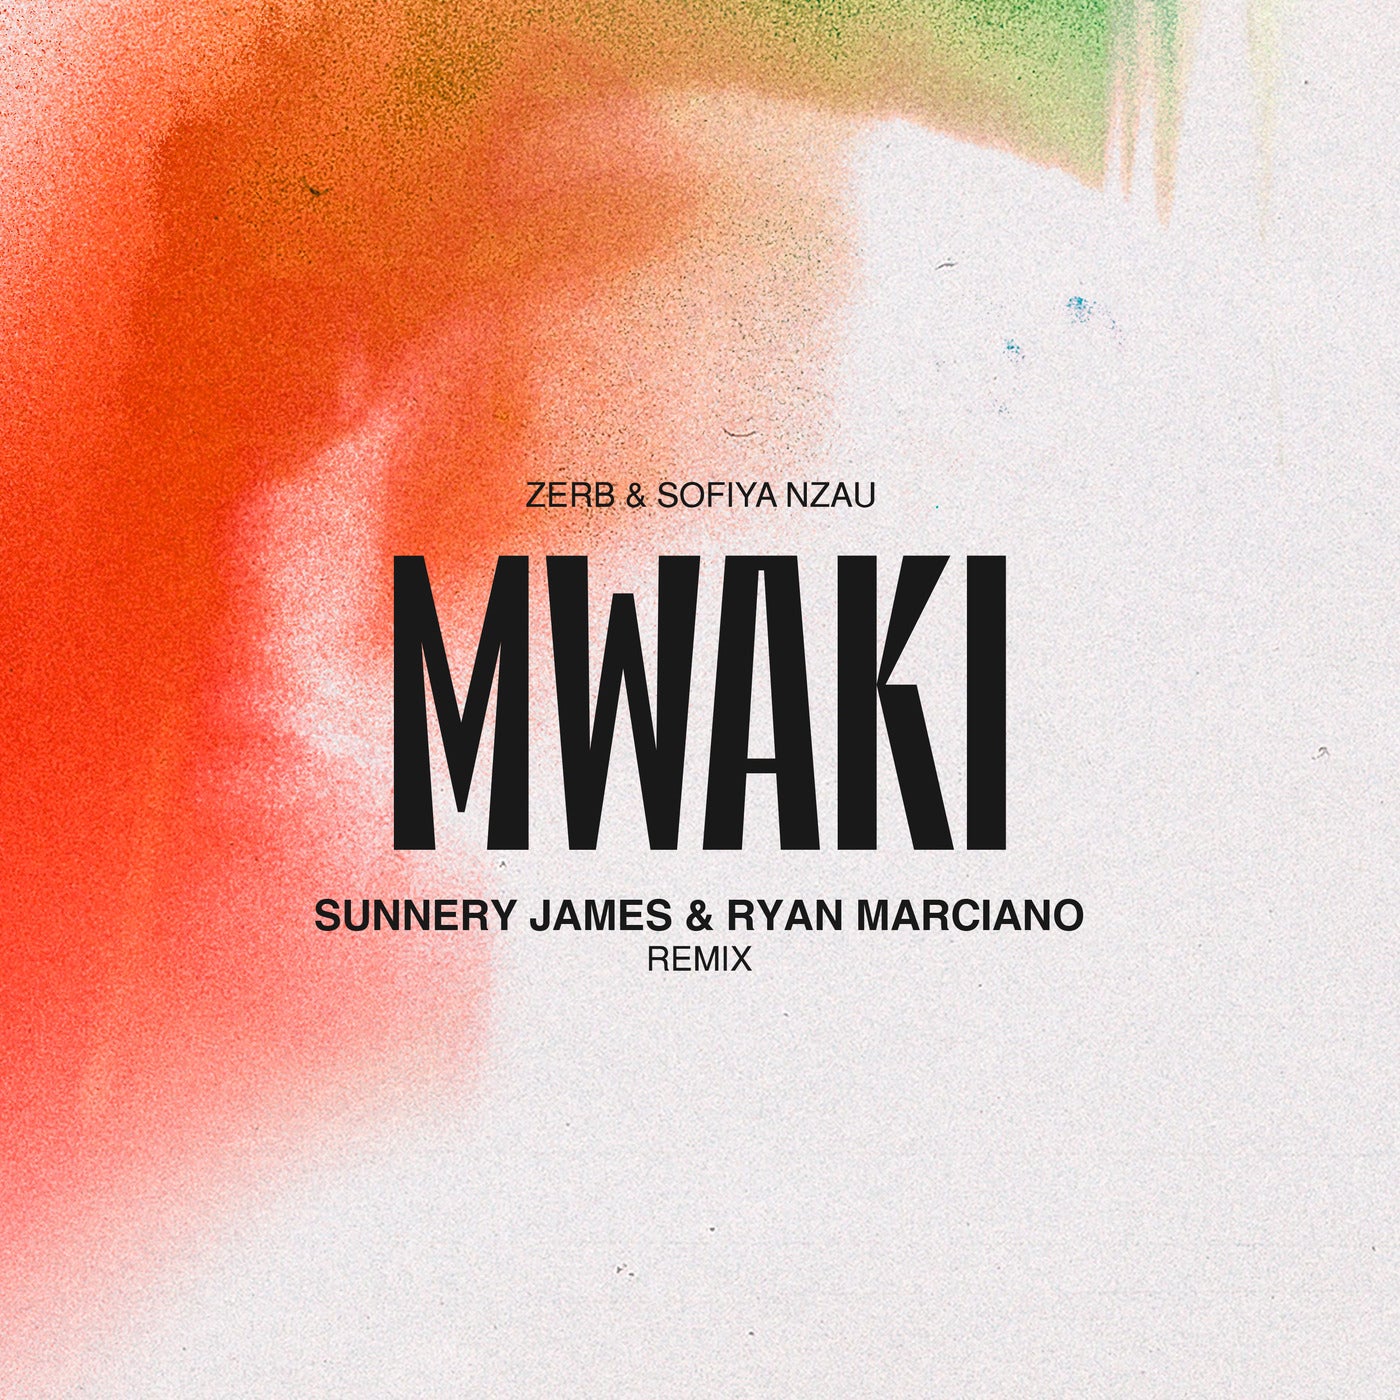 Release Cover: Mwaki - Sunnery James & Ryan Marciano Remix Extended Download Free on Electrobuzz